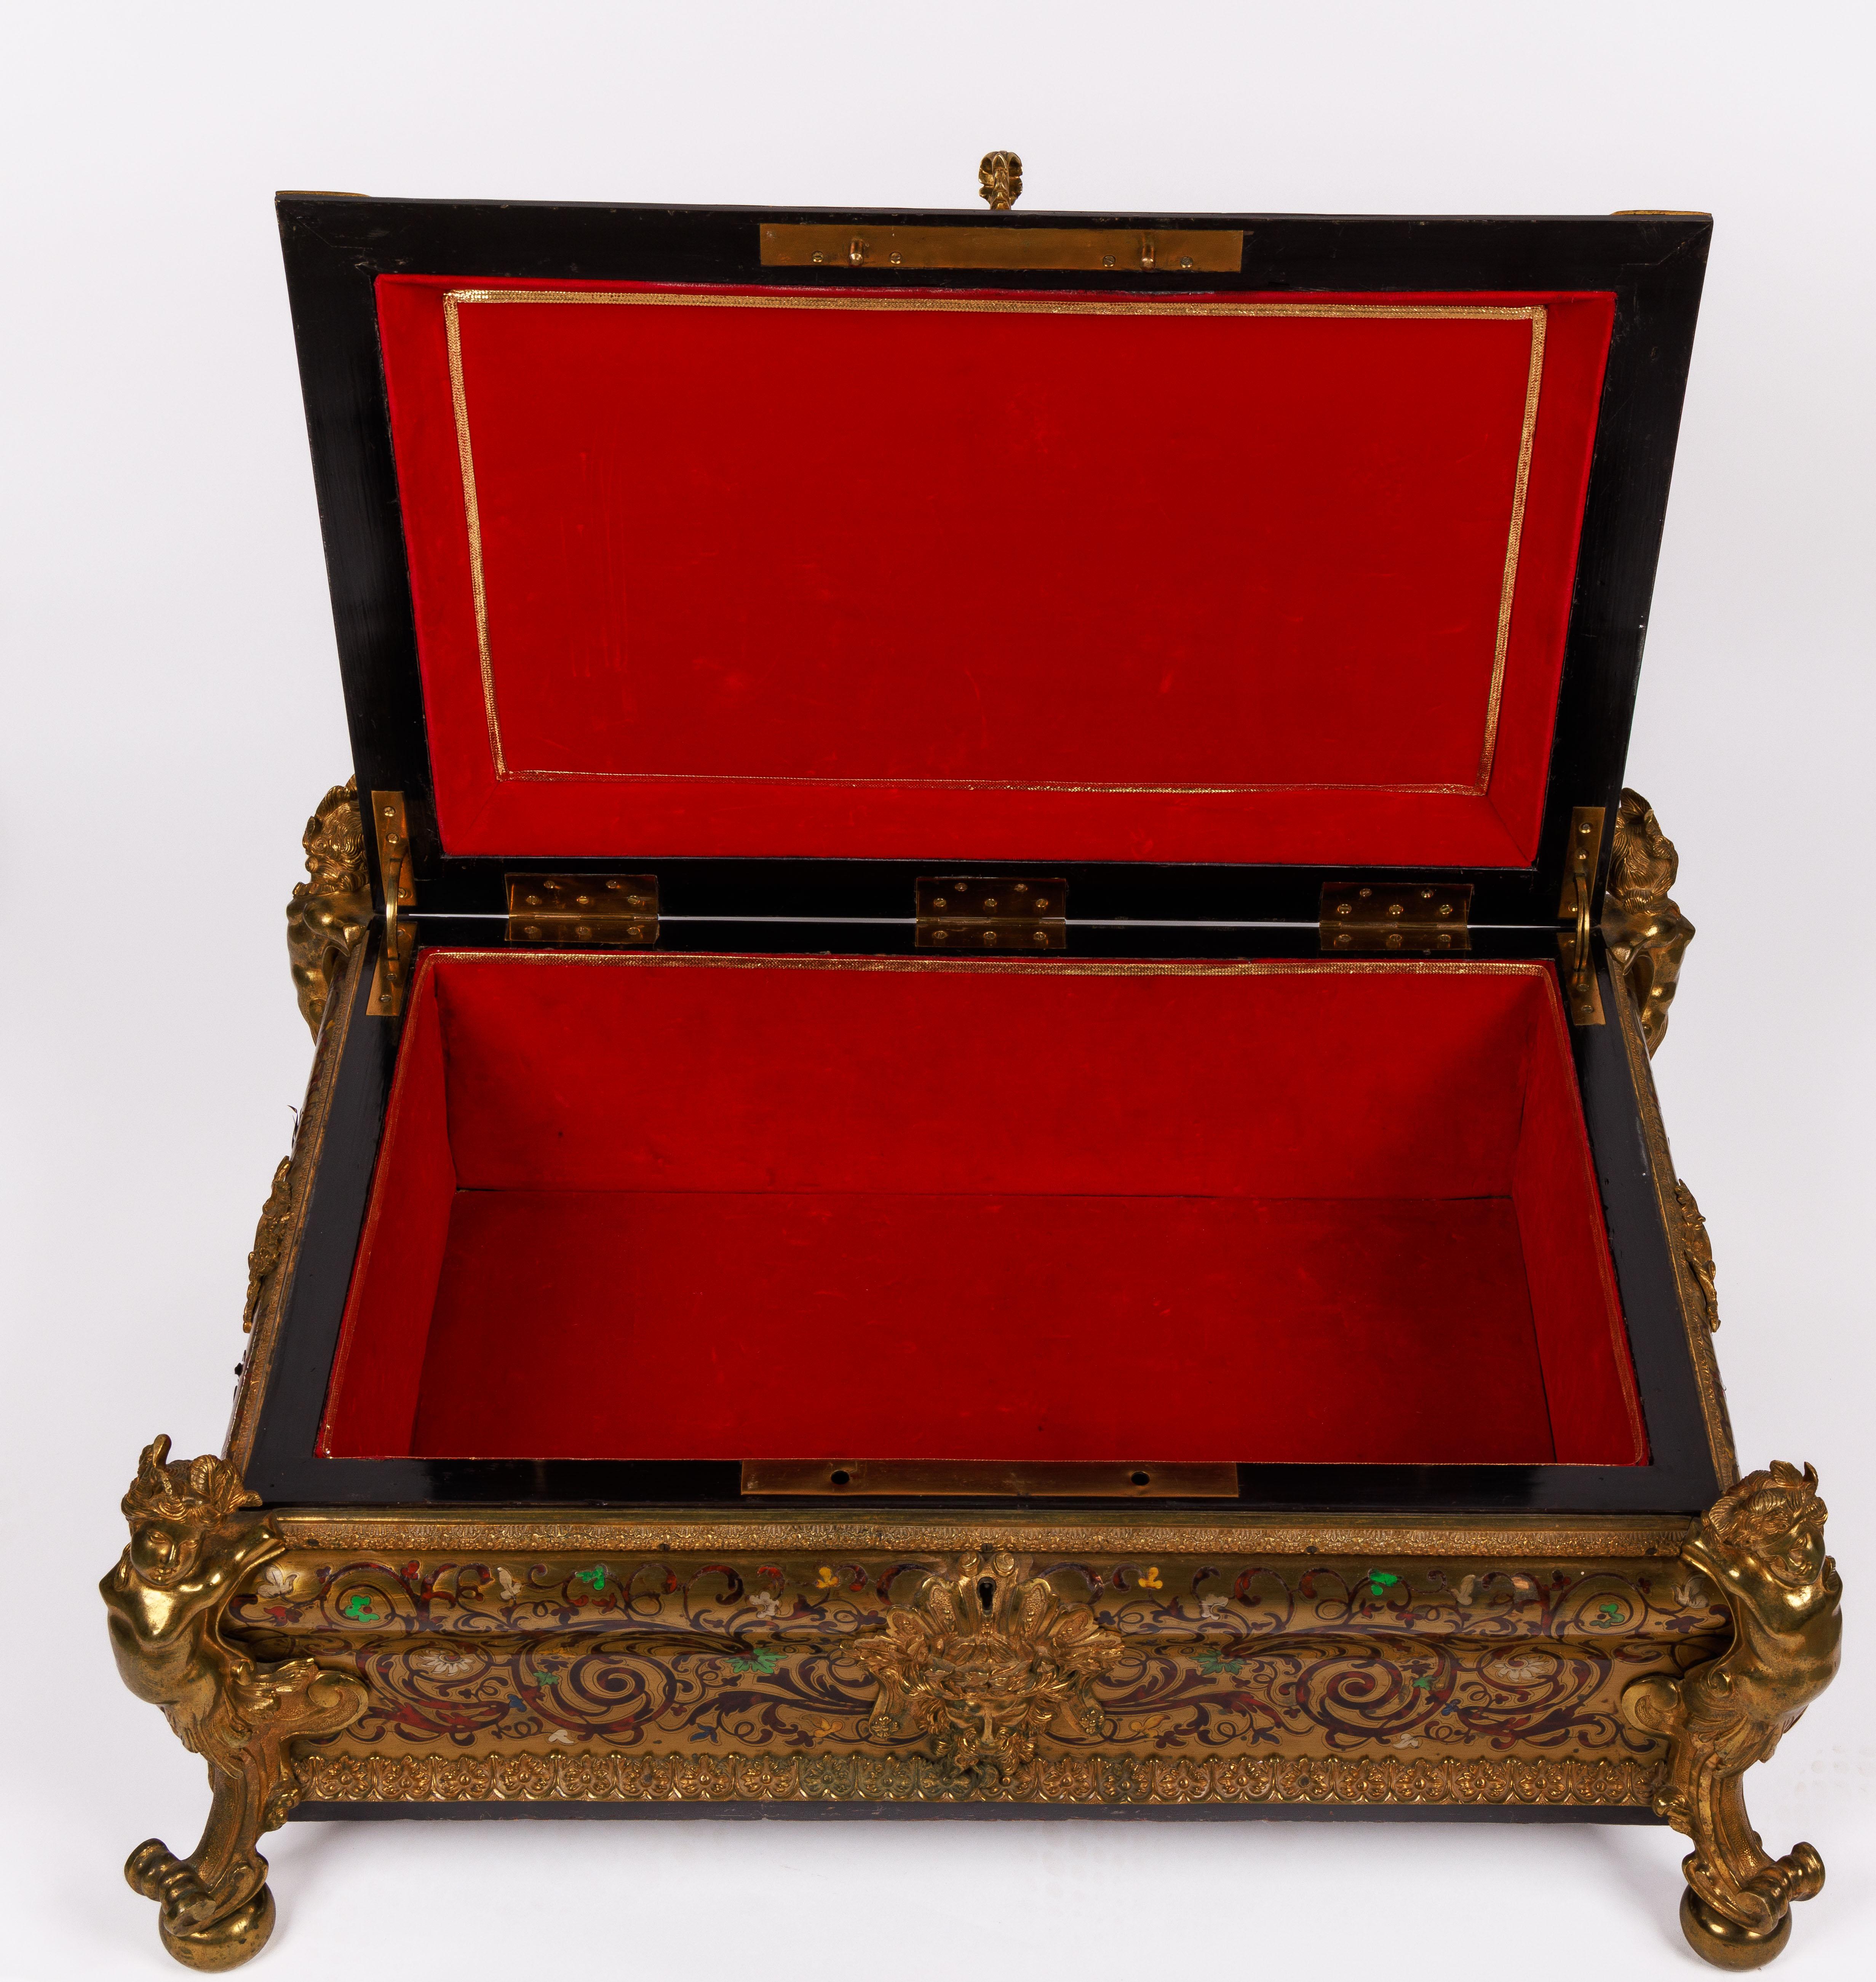 French Monumental Louis XIV Style Gilt-Bronze Mounted Boulle Marquetry Casket Box For Sale